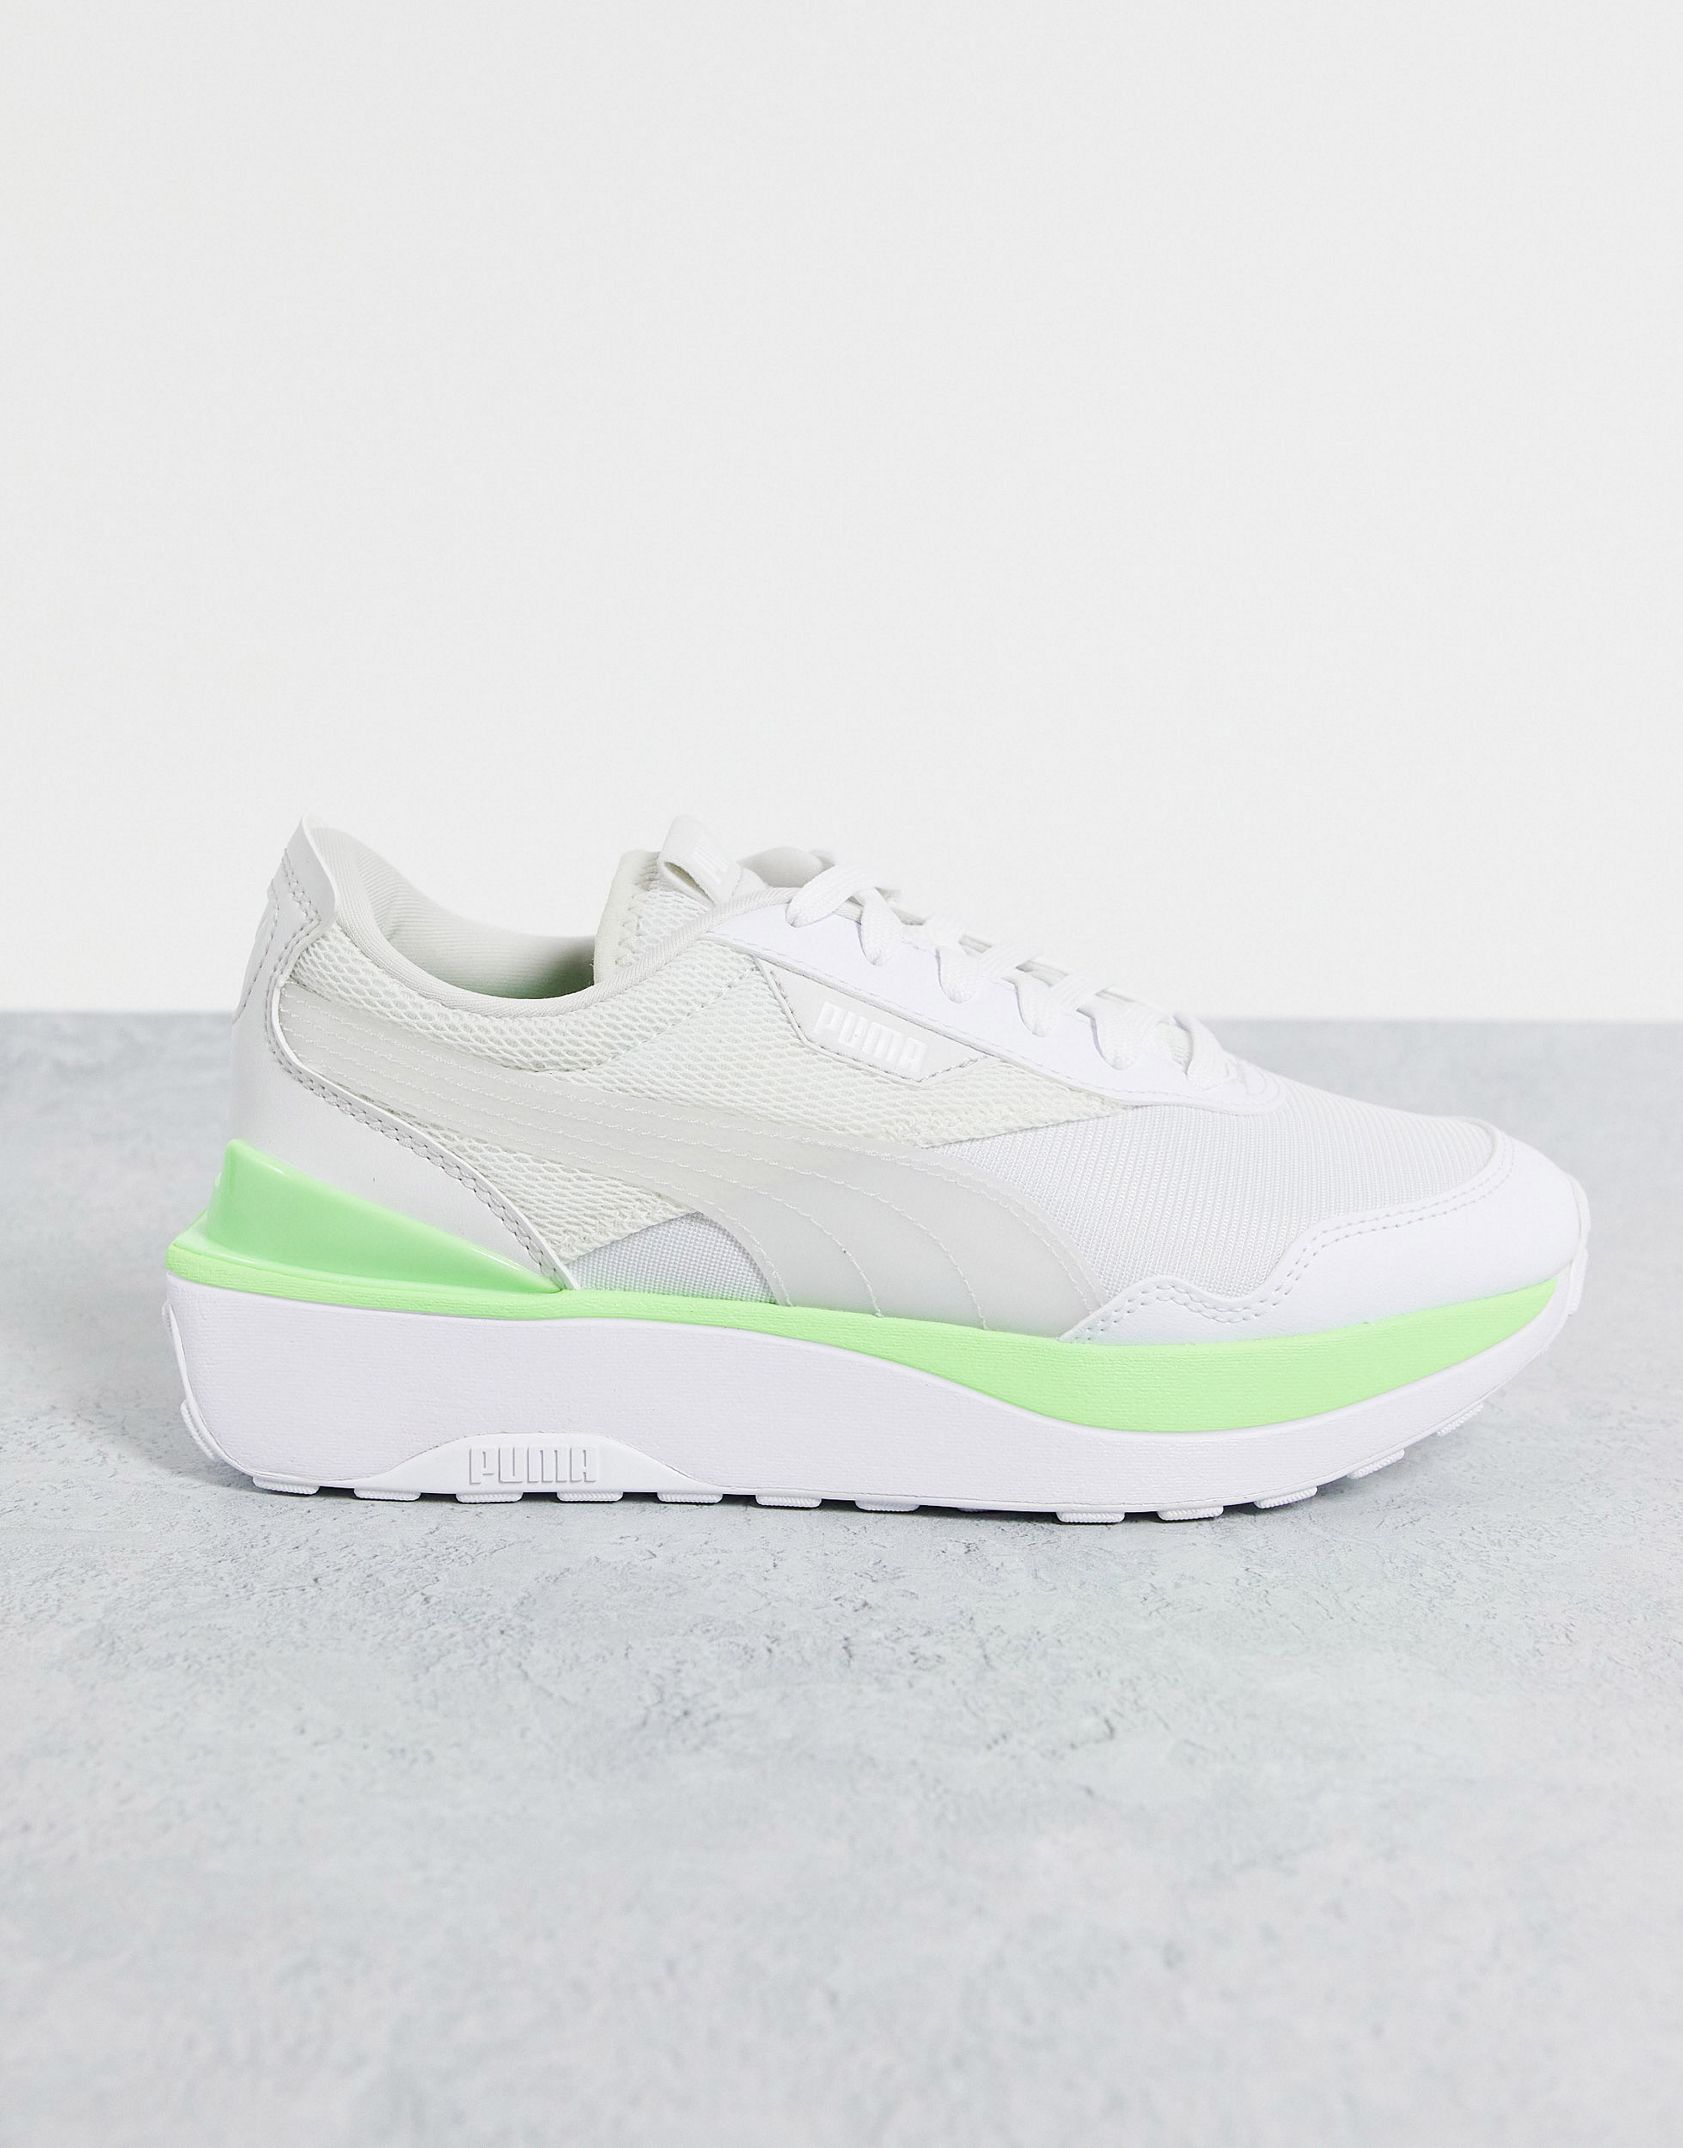 Puma Cruise Rider trainers in white and electric green